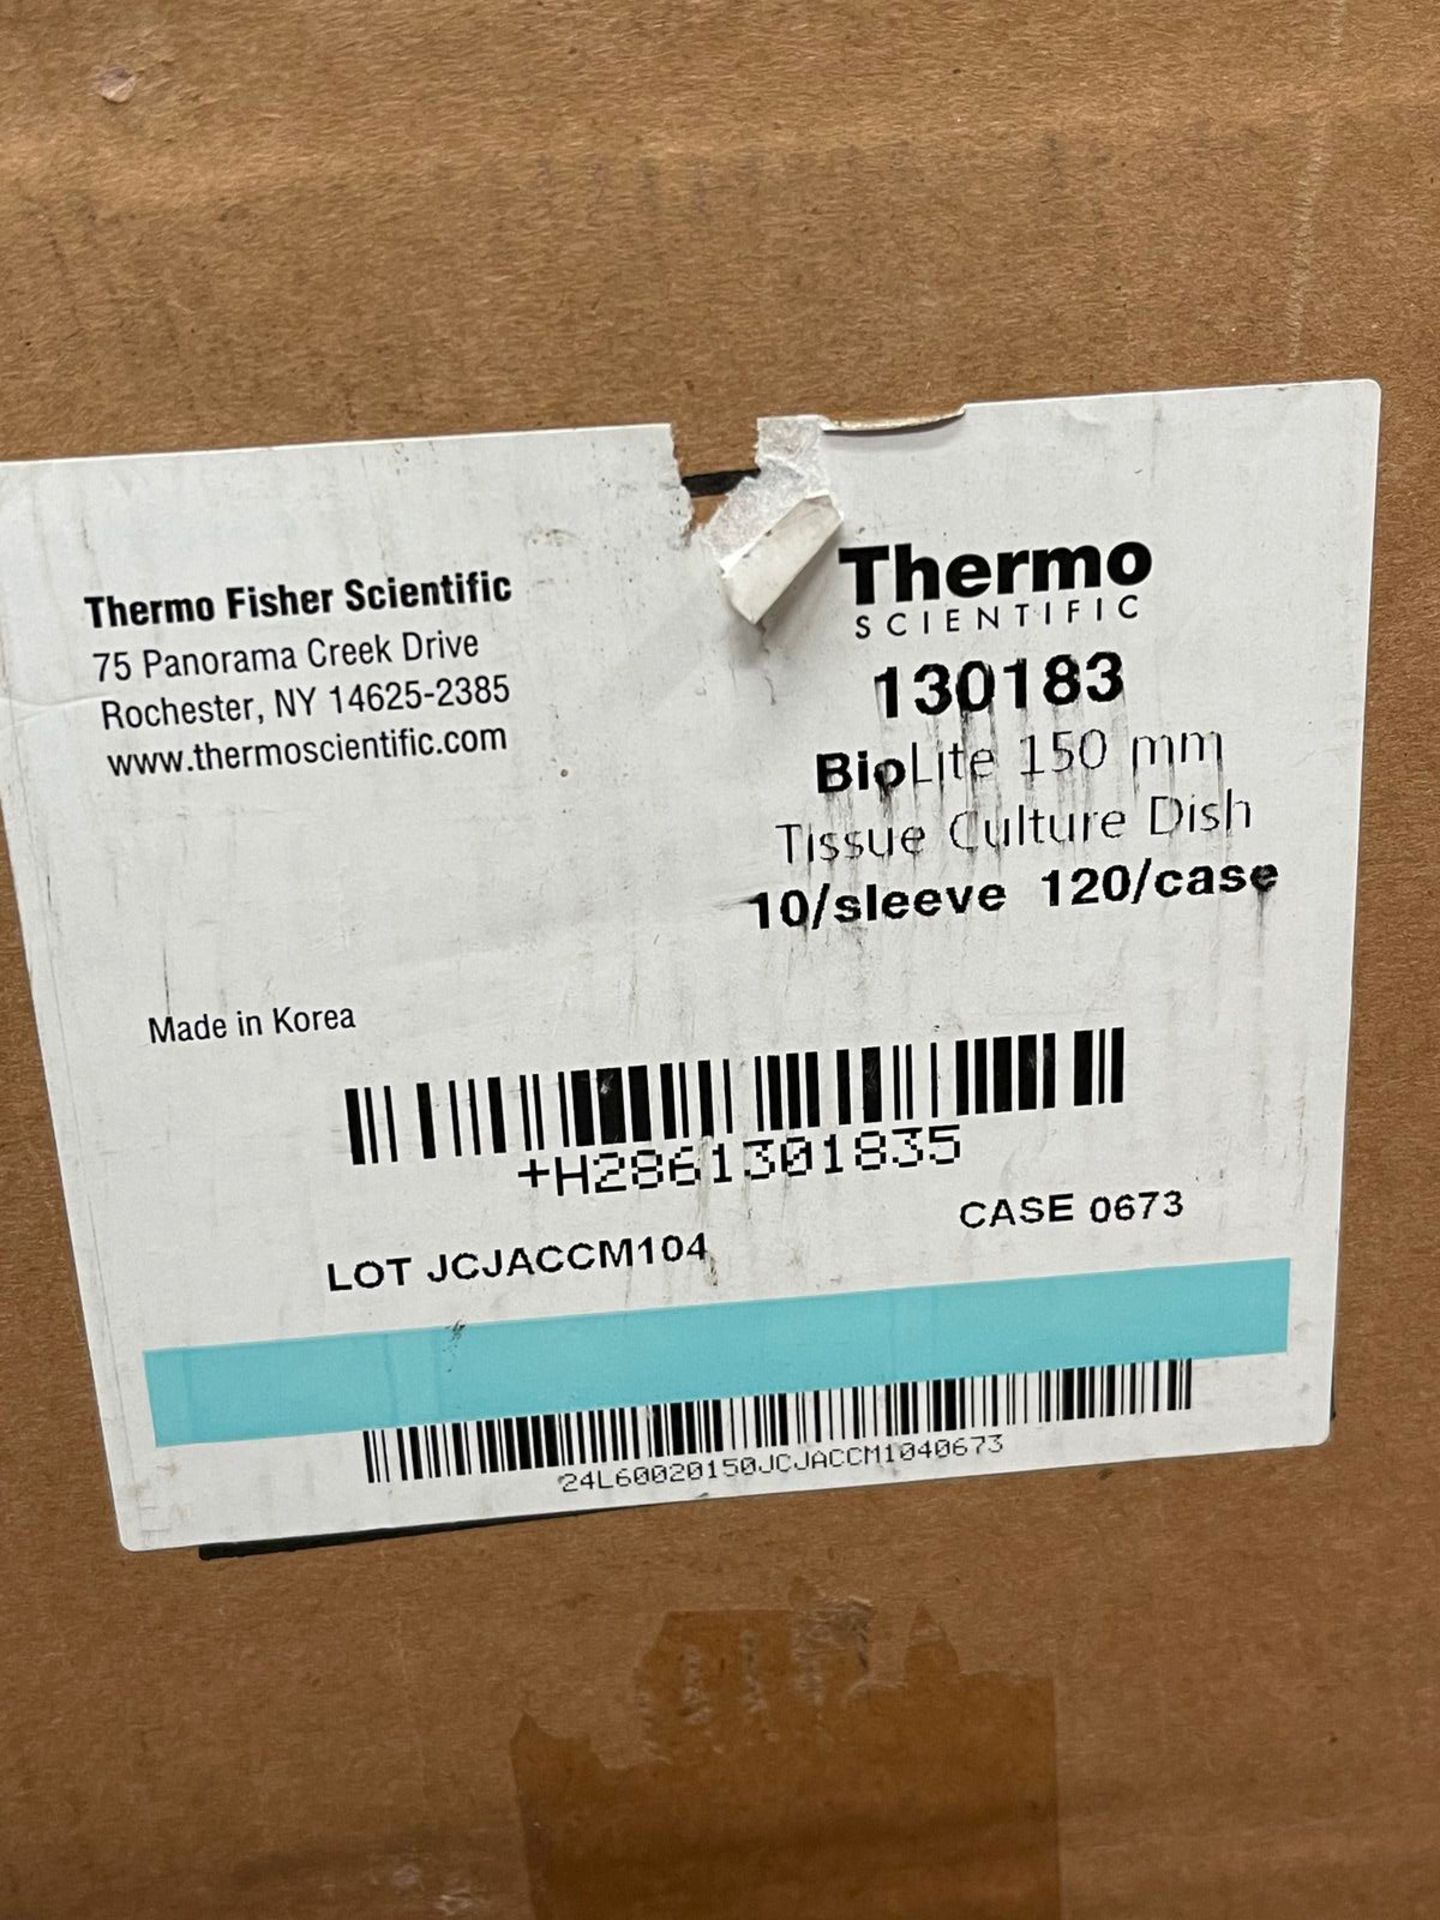 CASE OF THERMO SCIENTIFIC BIOLITE 150MM TISSUE CULTURE DISHES | Rig Fee: 10 - Image 2 of 2